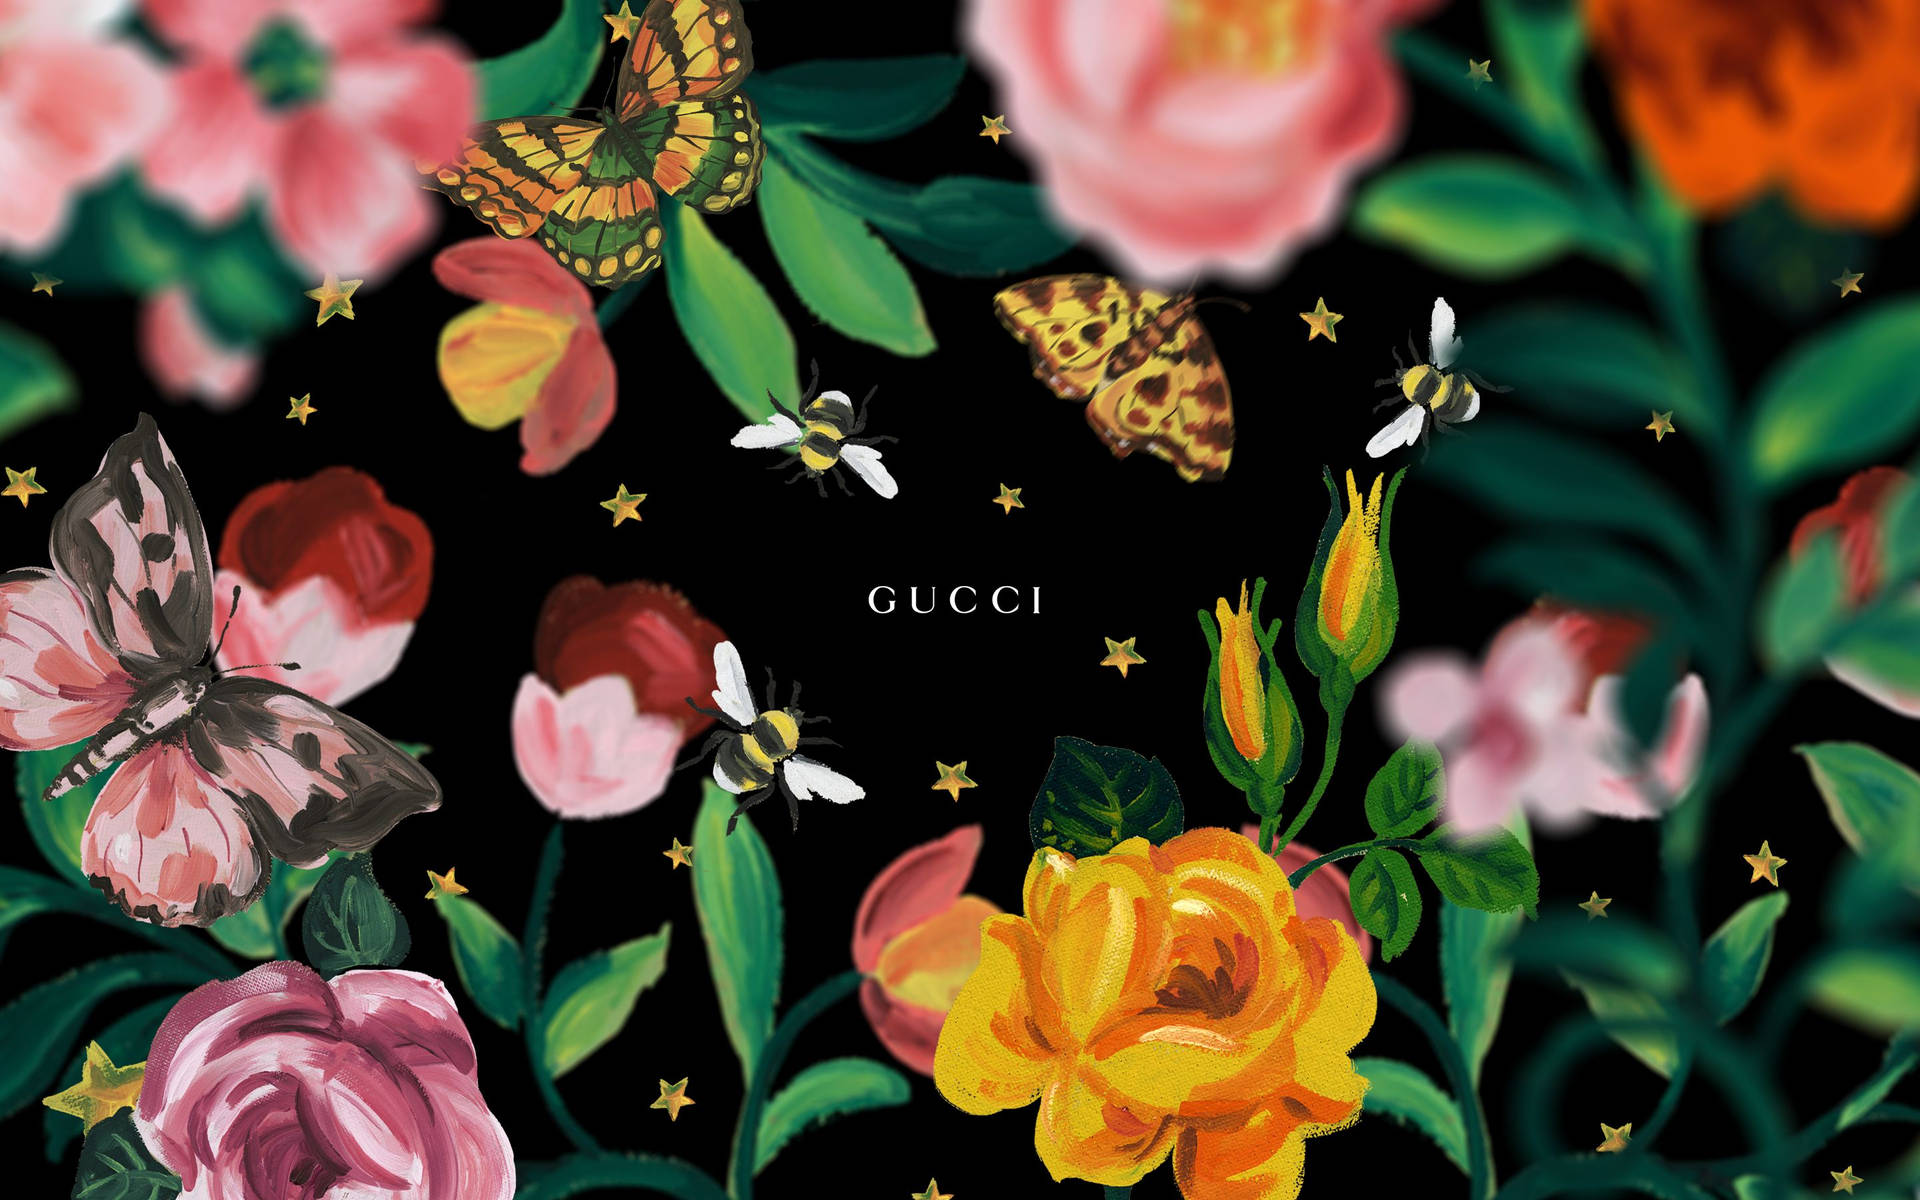 Free Gucci Pictures , [100+] Gucci Pictures for FREE | Wallpapers.com